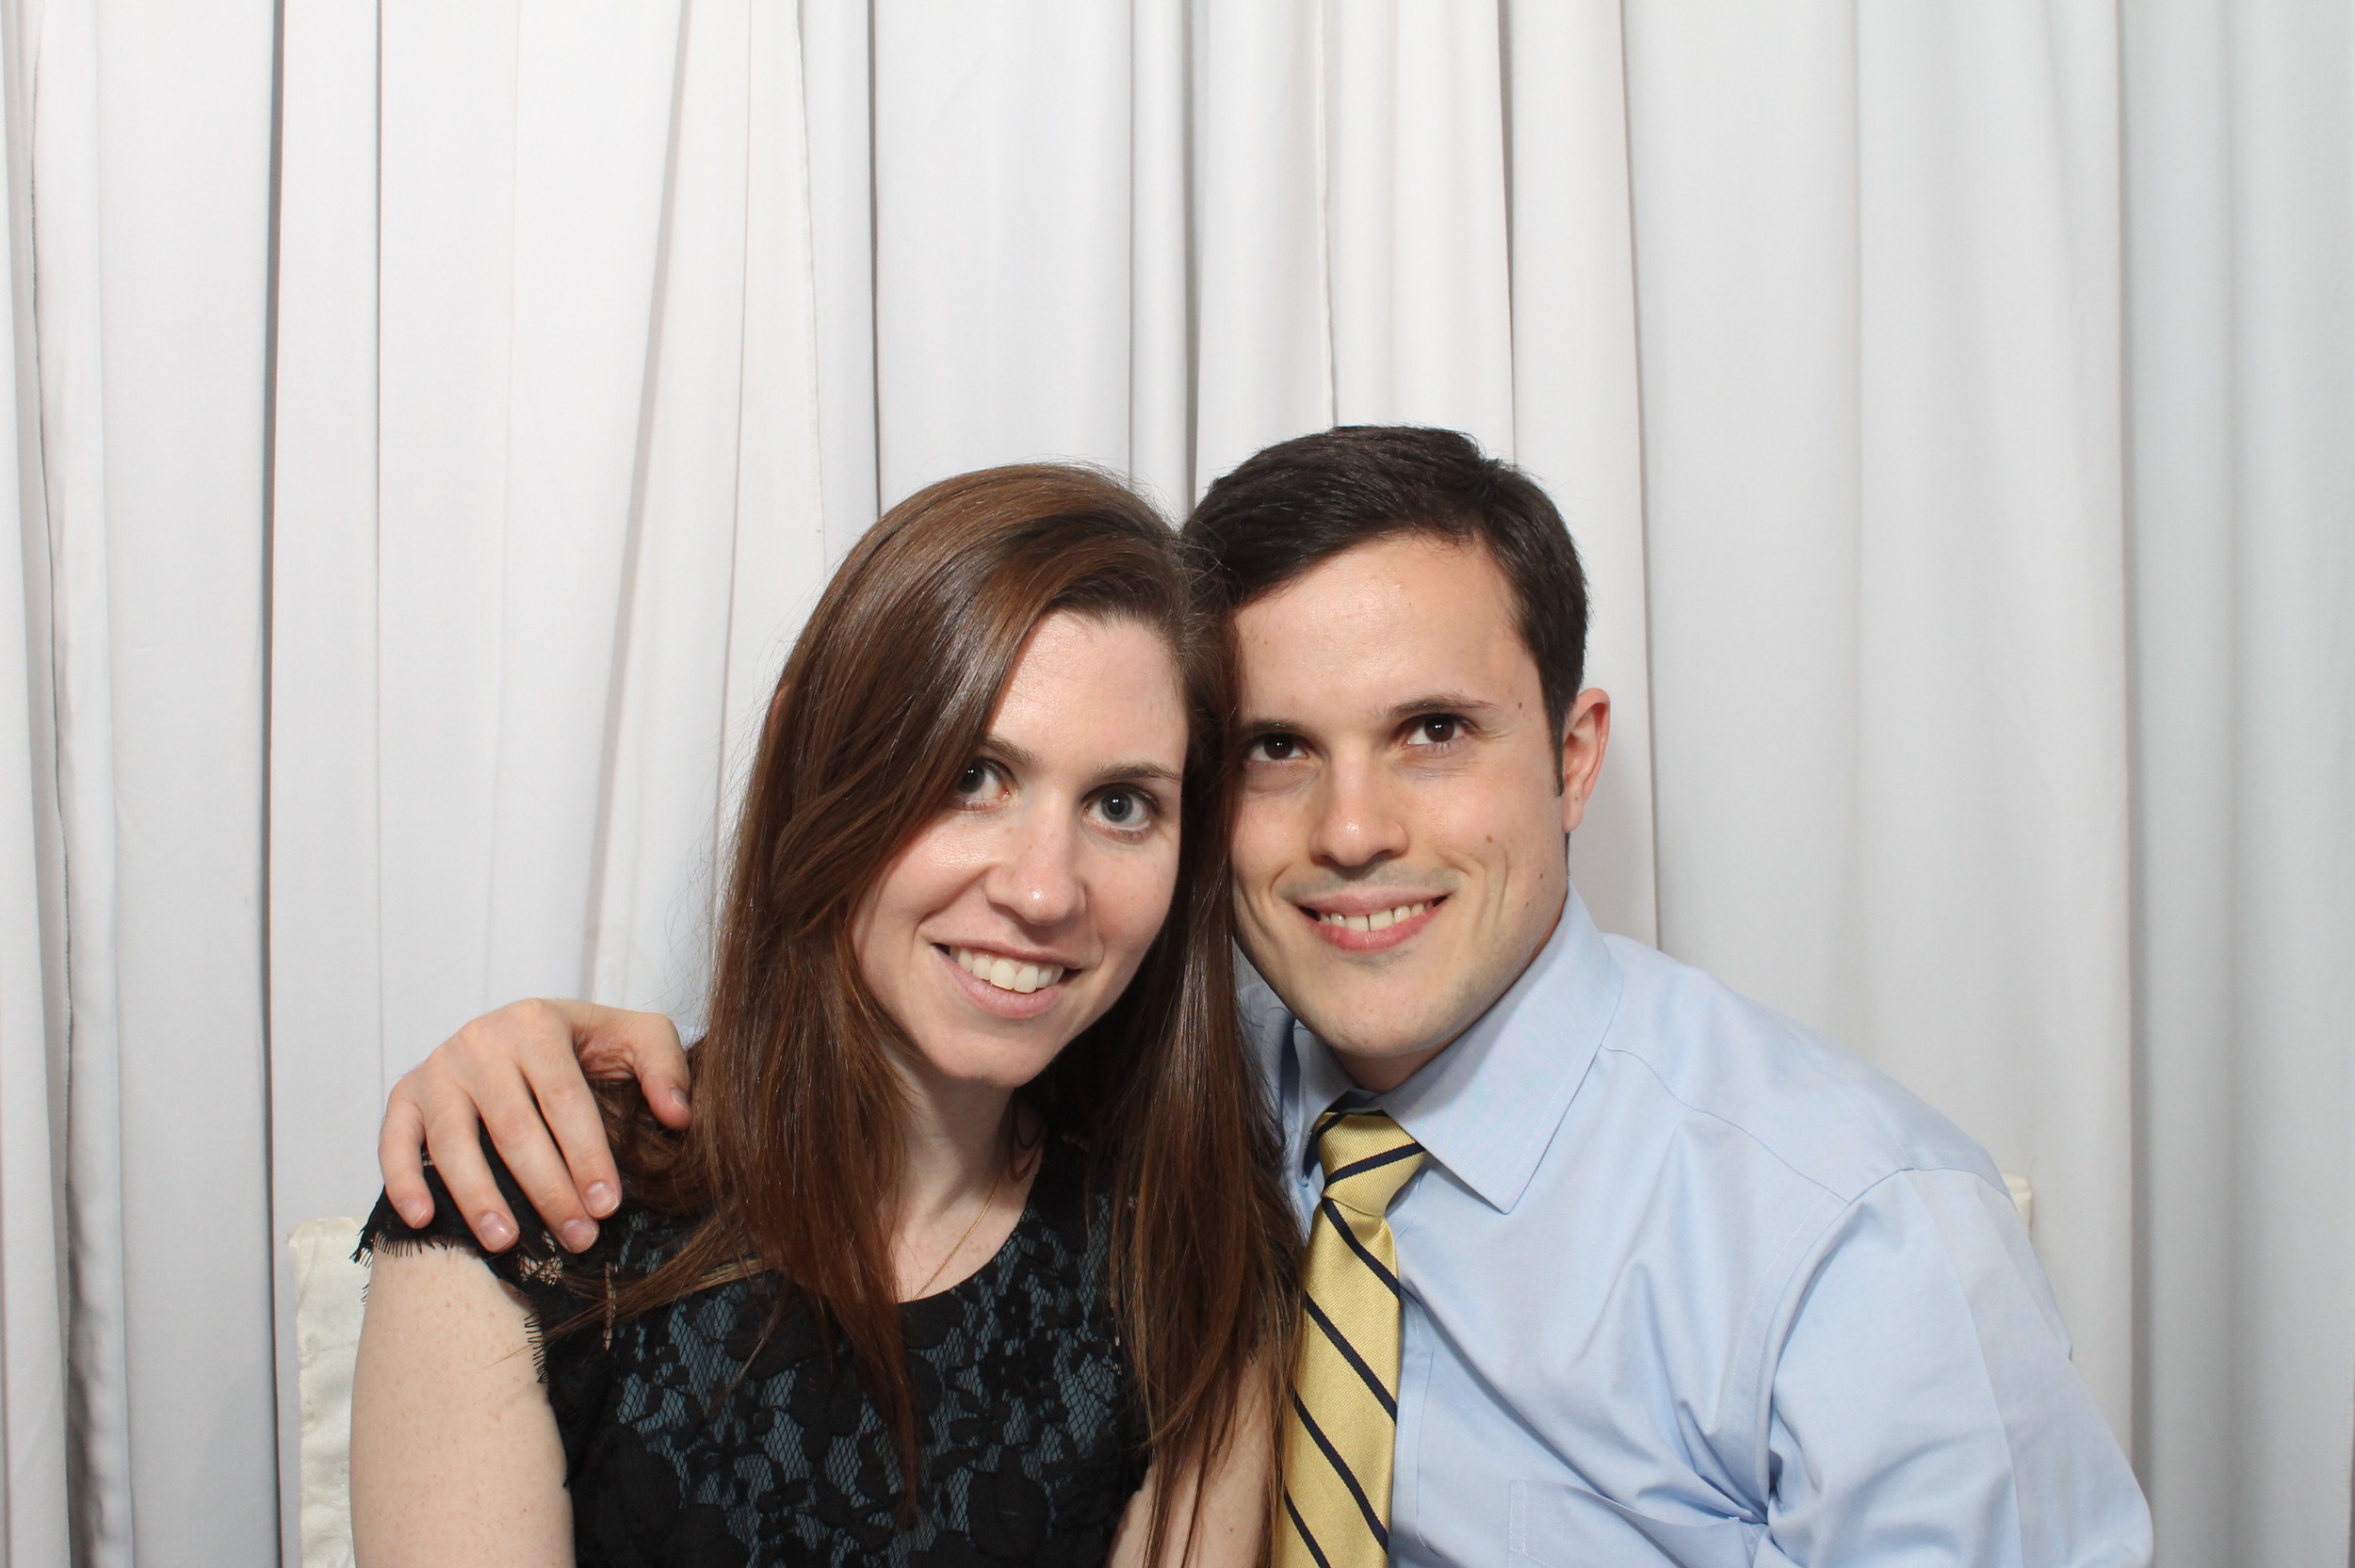 Snapshot Photobooths at the DoubleTree in Tinton Falls, New Jersey